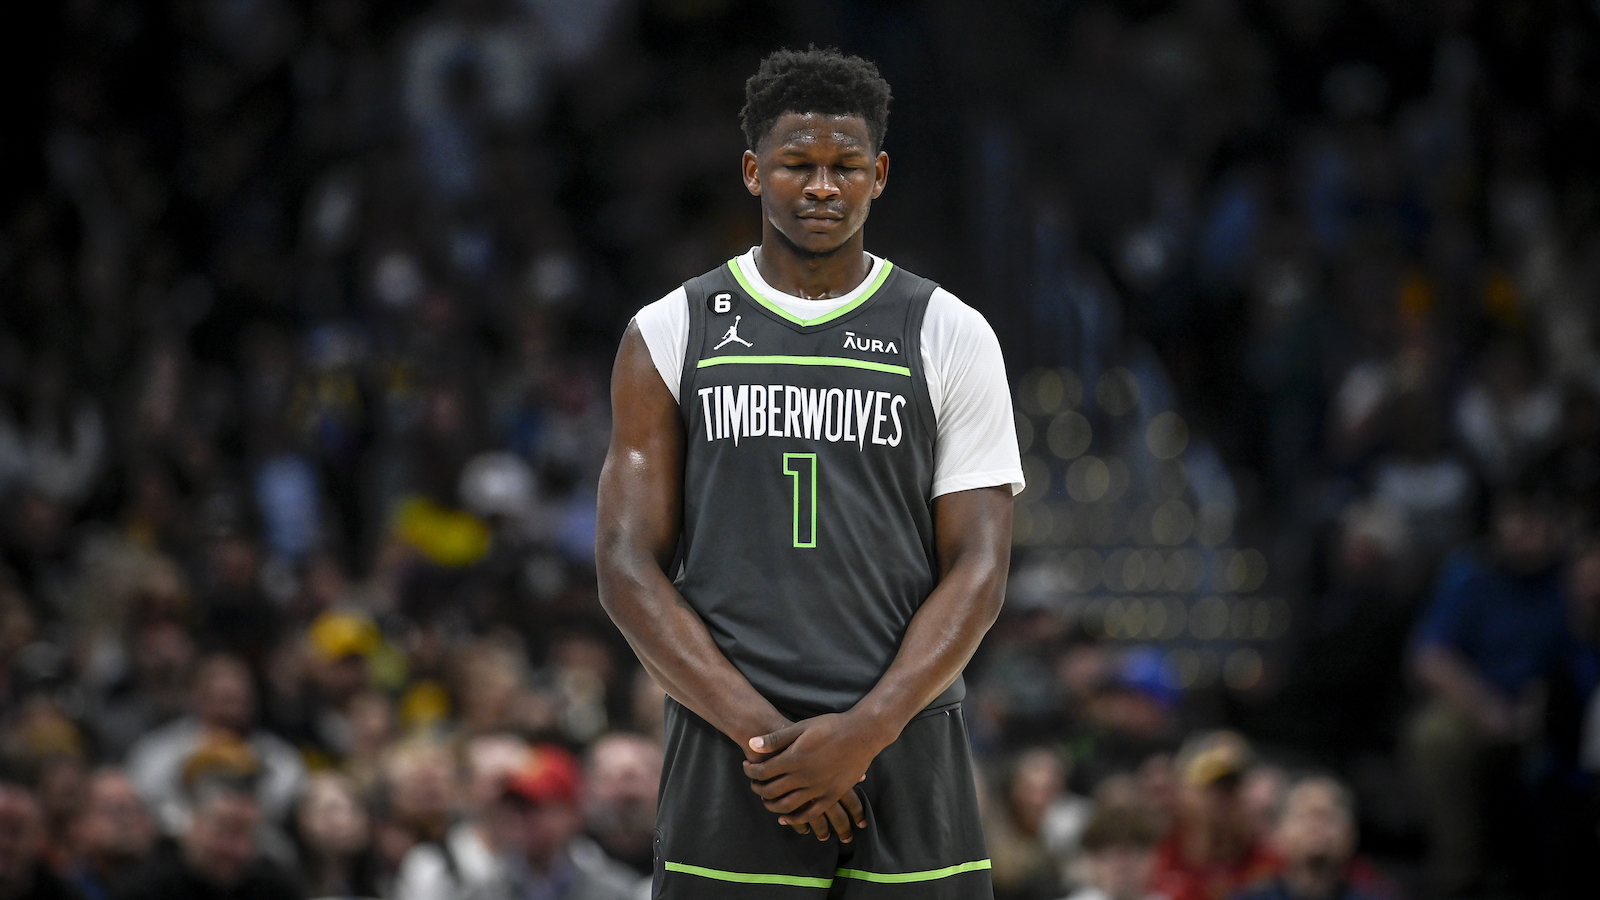 DENVER, CO - APRIL 25: Anthony Edwards (1) of the Minnesota Timberwolves stands during a break in action in the third quarter against the Denver Nuggets at Ball Arena in Denver on Tuesday, April 25, 2023.